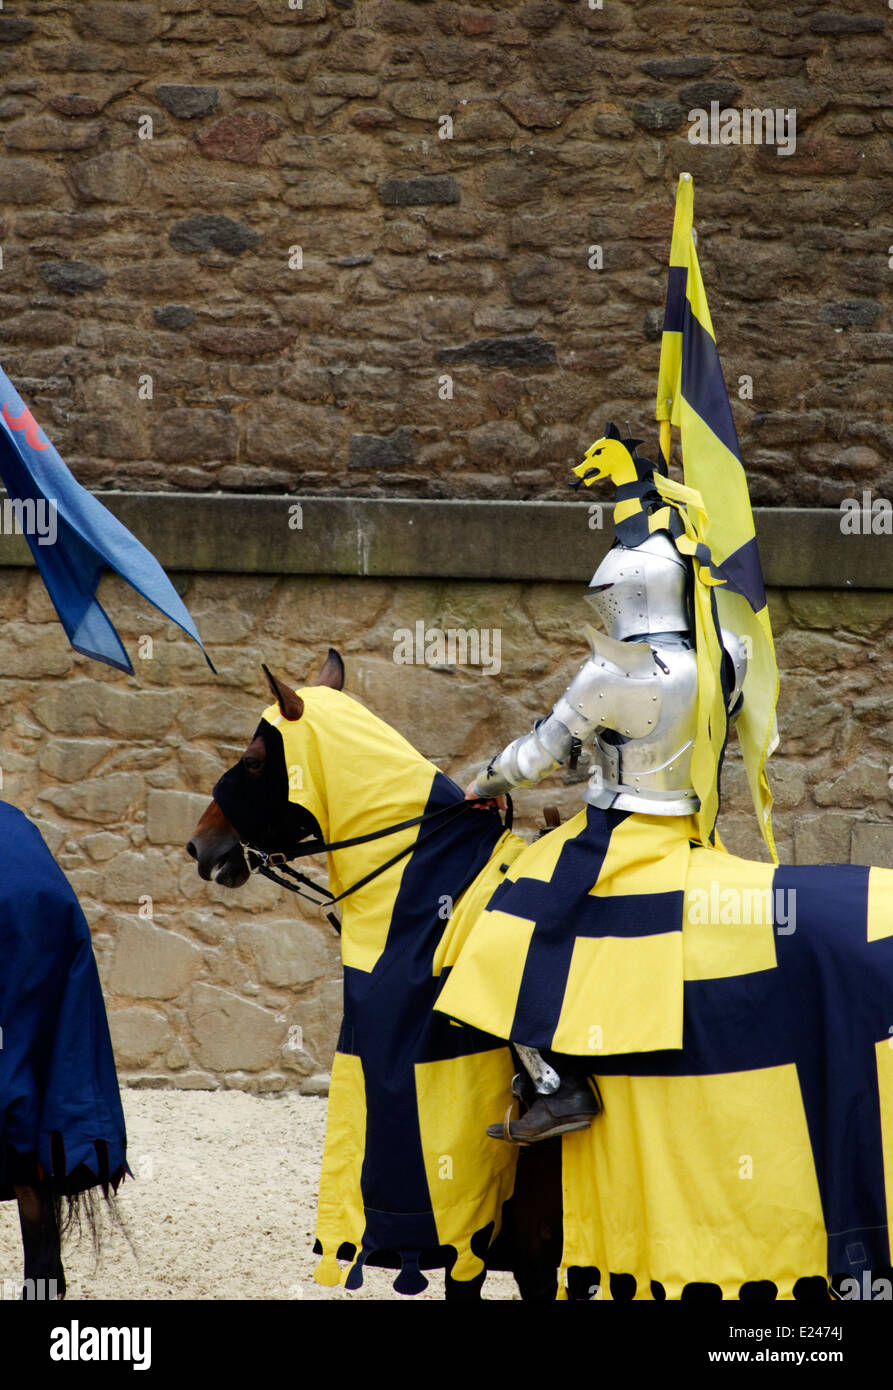 Knights in shining armour at Puy du Fou in Vendee, France Stock Photo